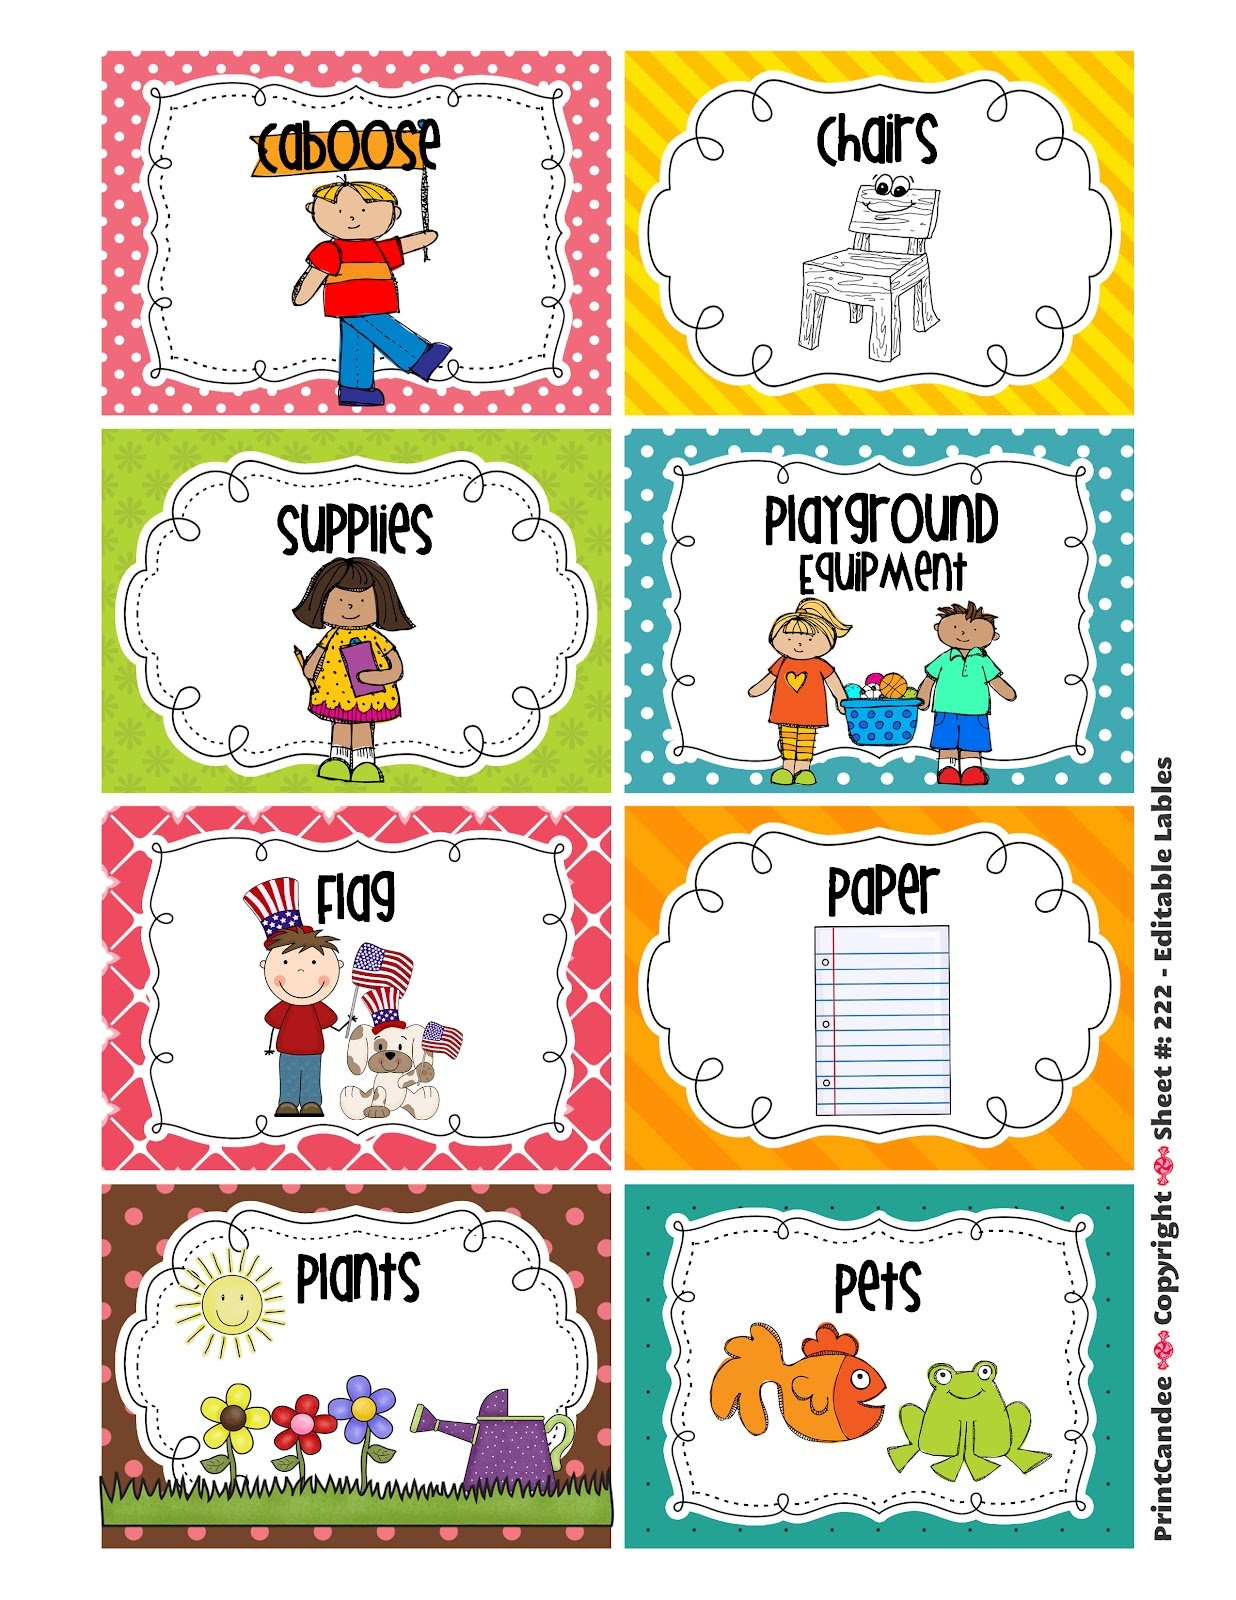 Free Printable Classroom Signs And Labels (85+ Images In Collection - Free Printable Classroom Signs And Labels